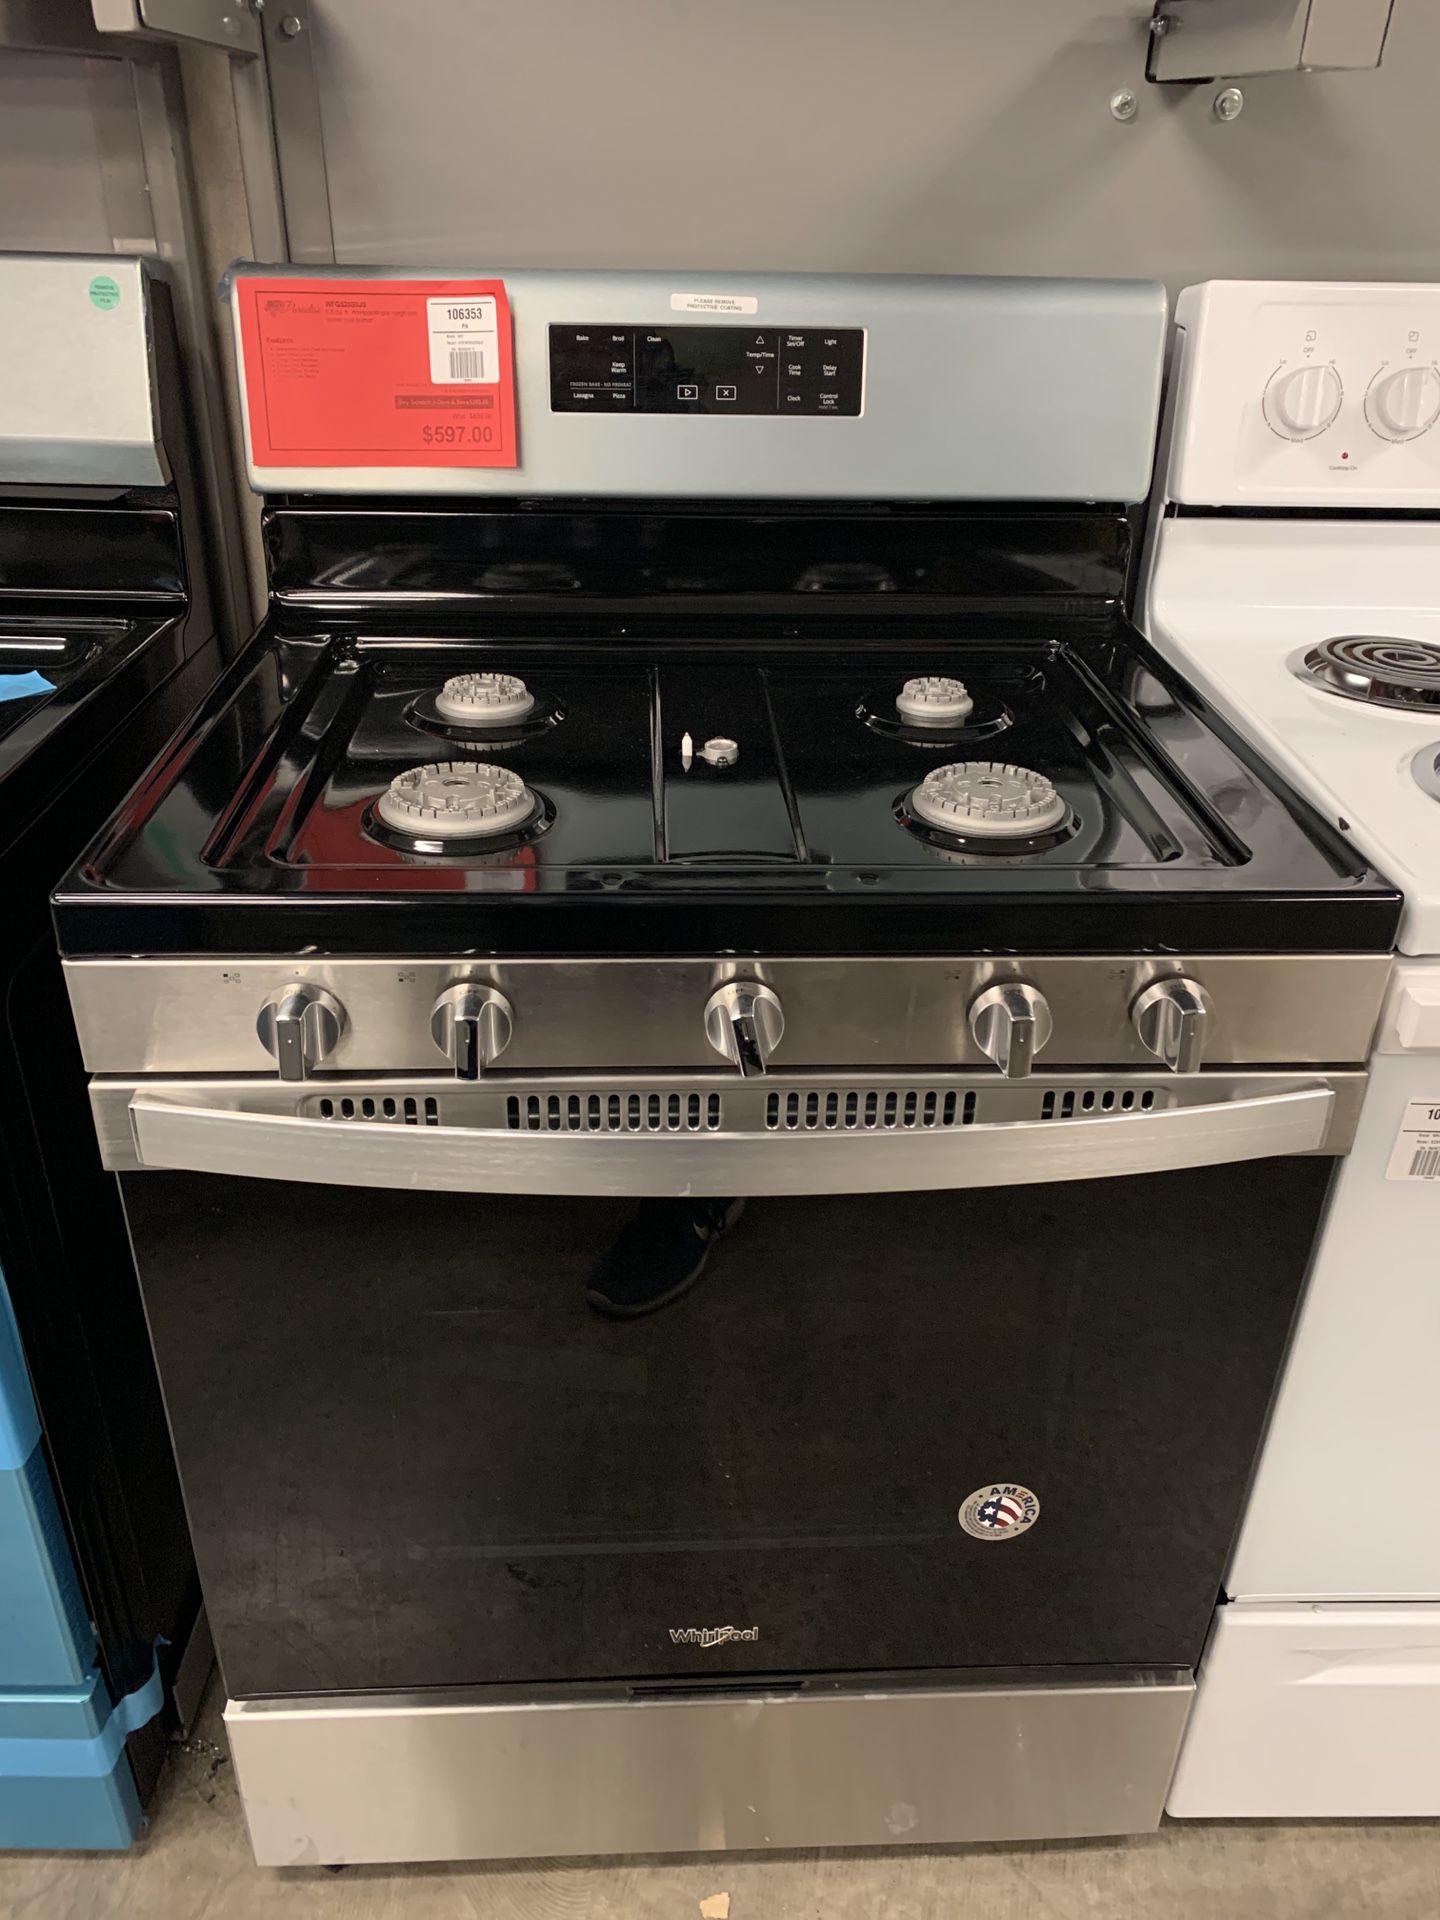 New Discounted Whirlpool Gas Range 1yr Manufacturers Warranty